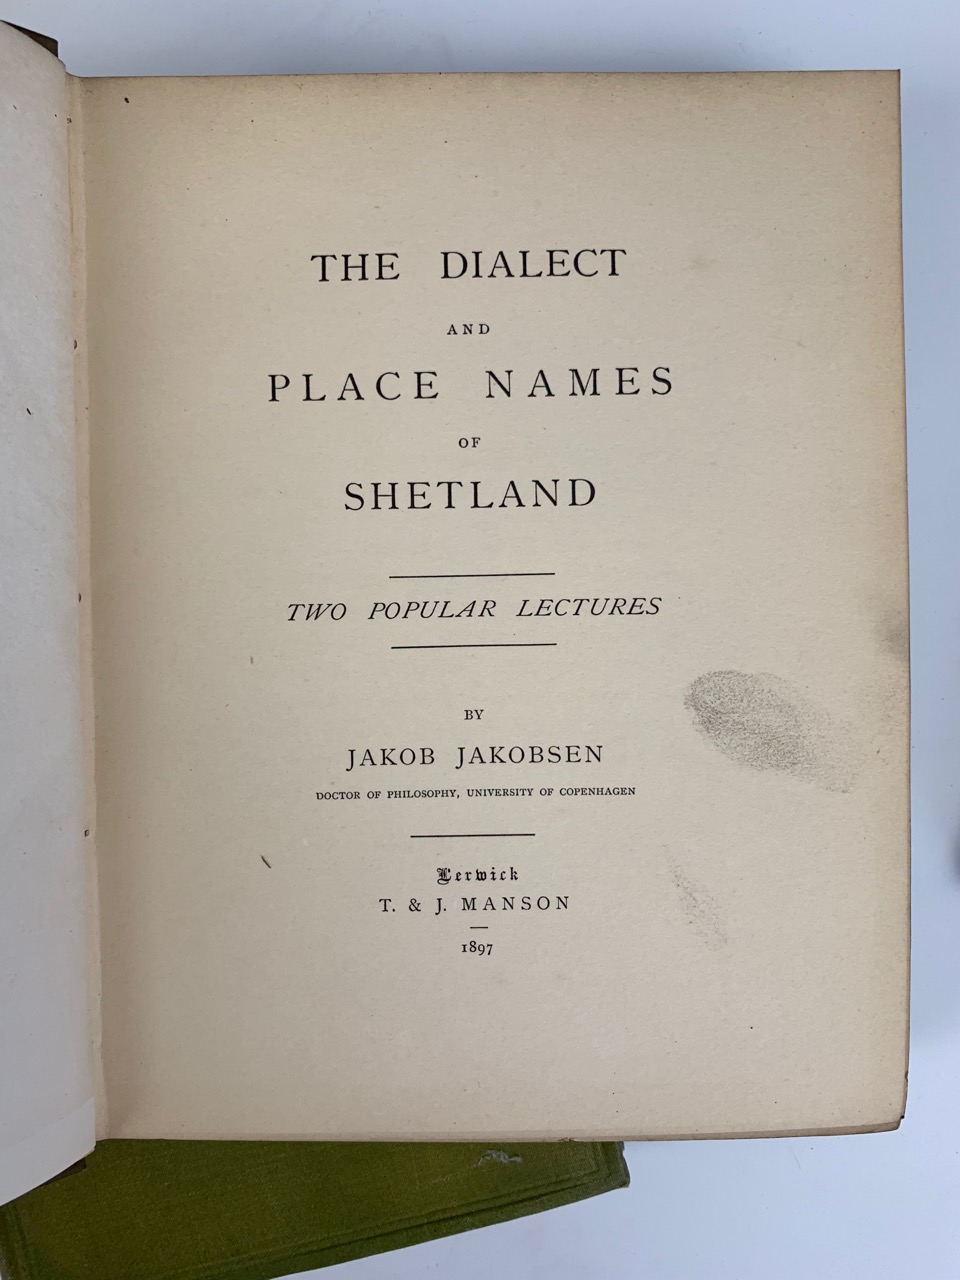 [Scots language and dialect] Jakob Jakobsen, "The Dialect and Place Names of Shetland", Lerwick, - Image 4 of 4